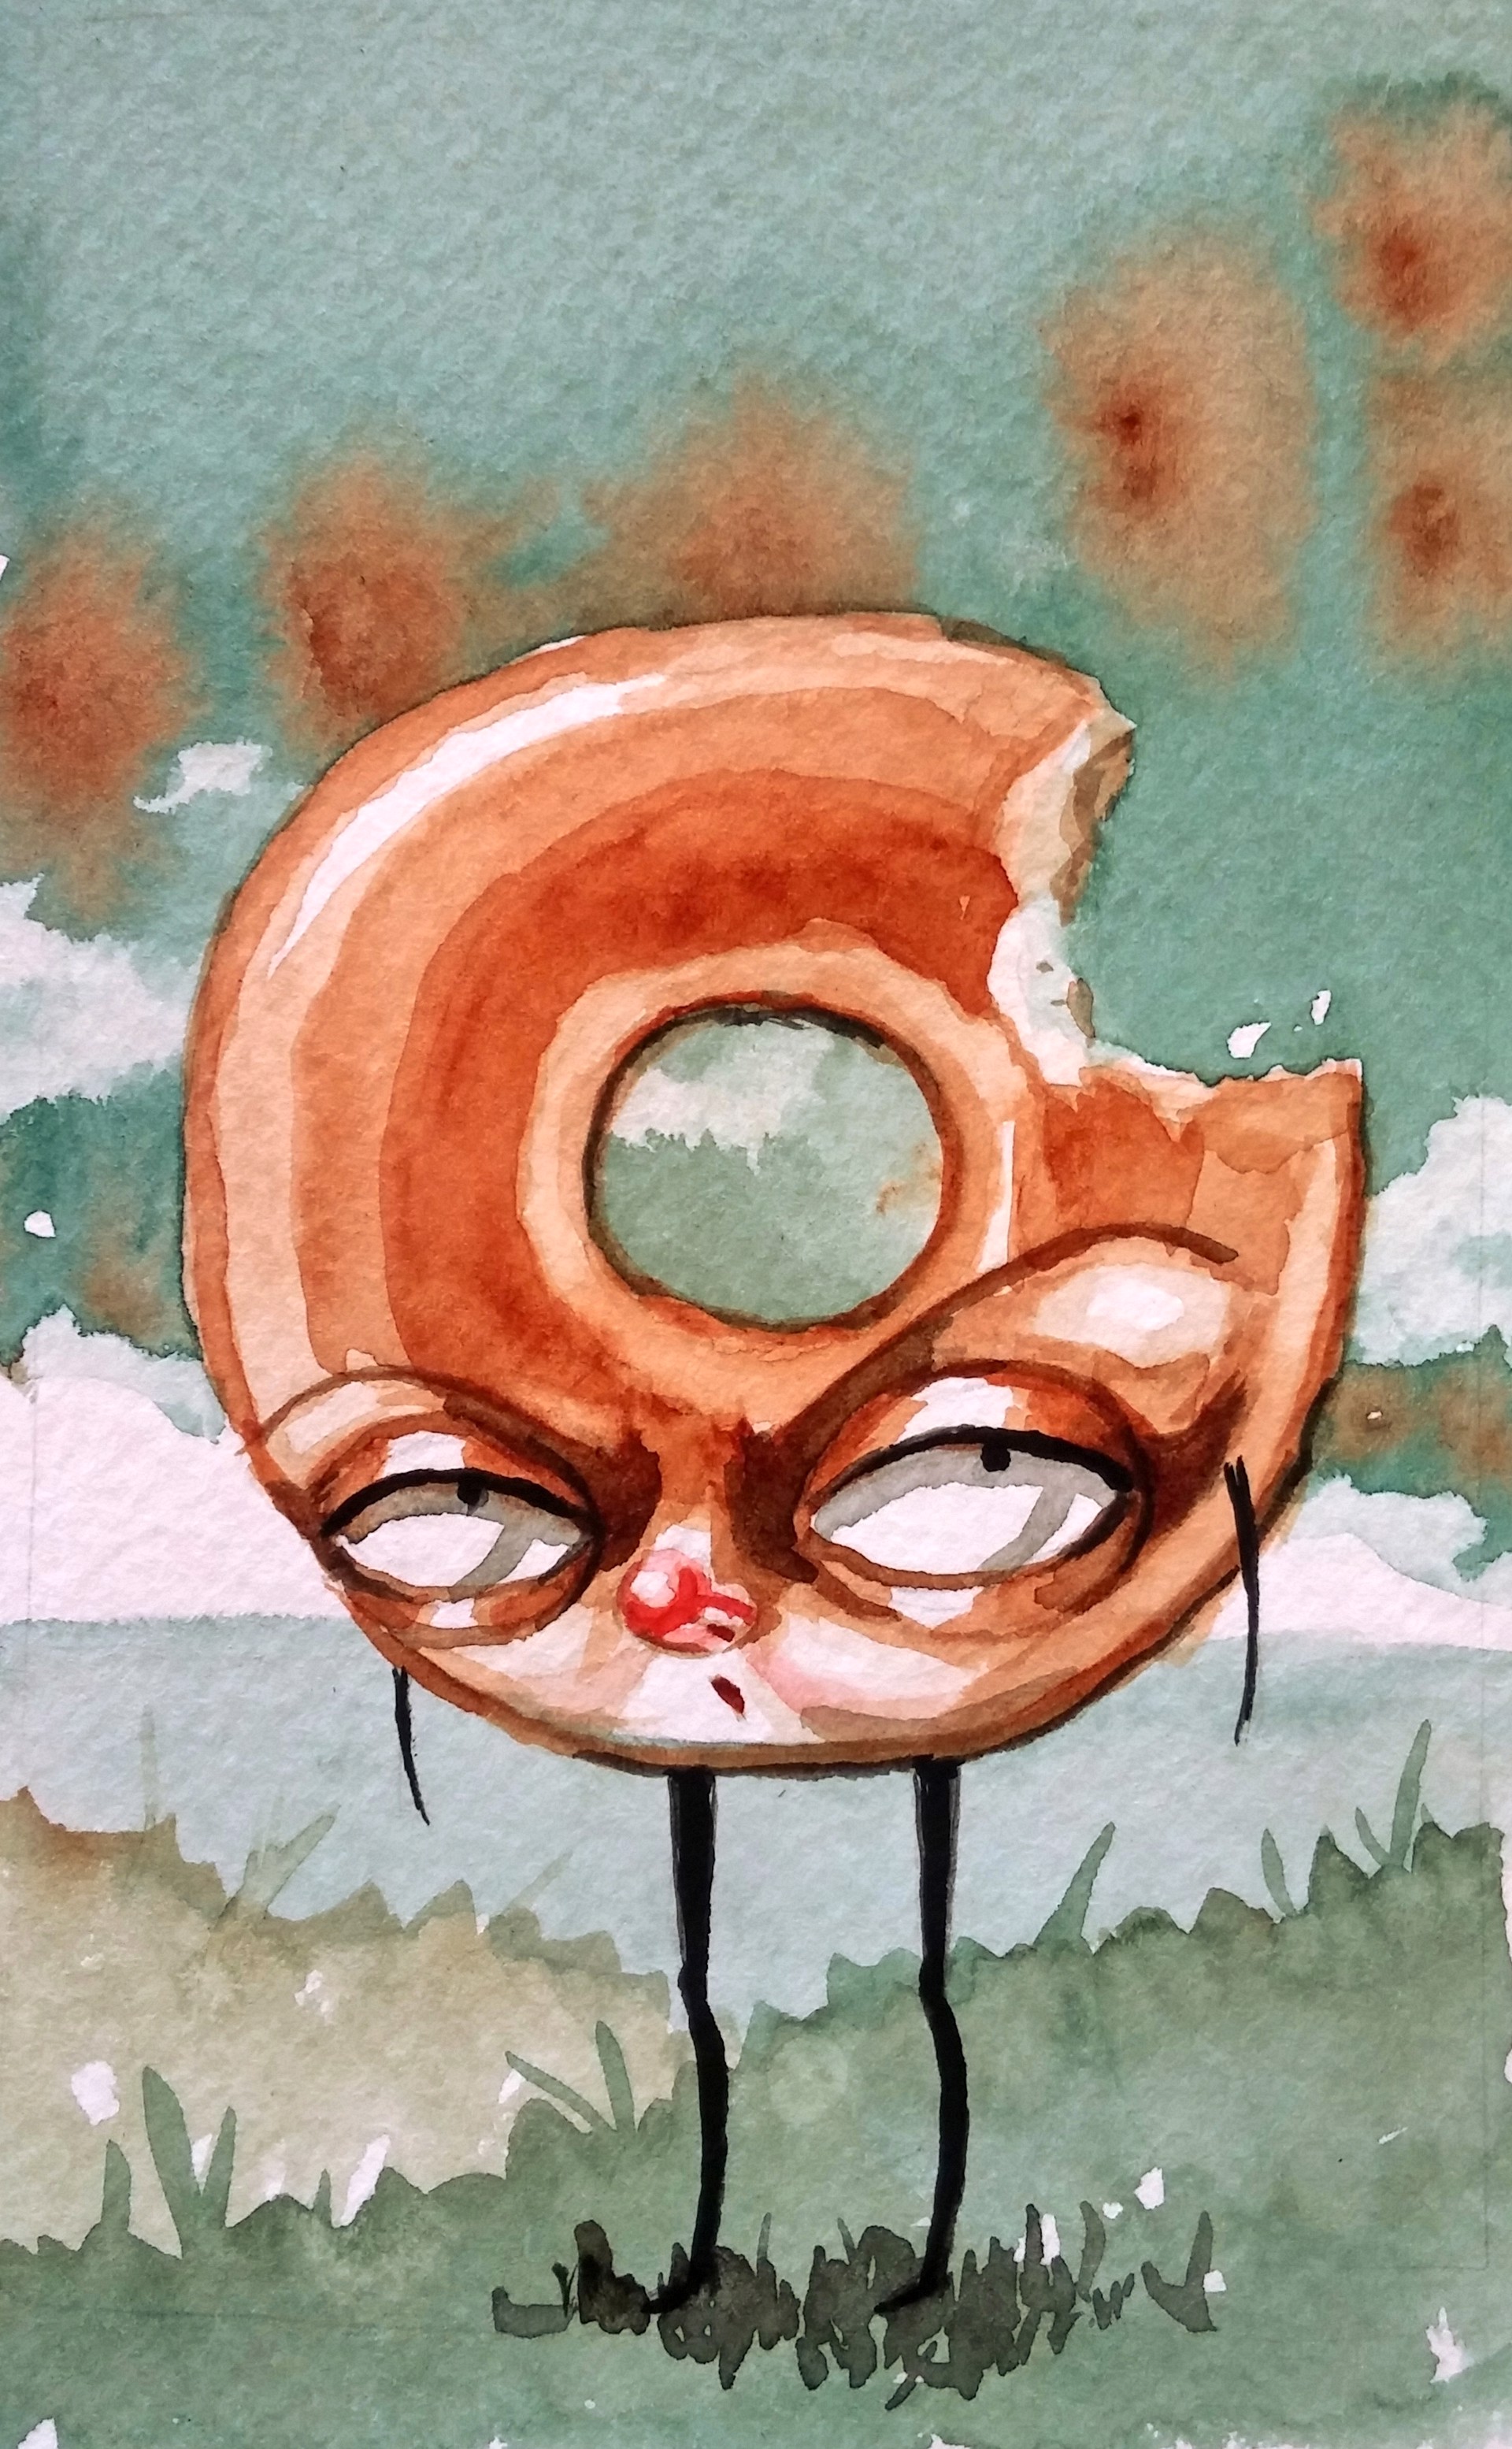 Donut of Fury (Giclee on Deckled Paper) G.O. by Liese Chavez